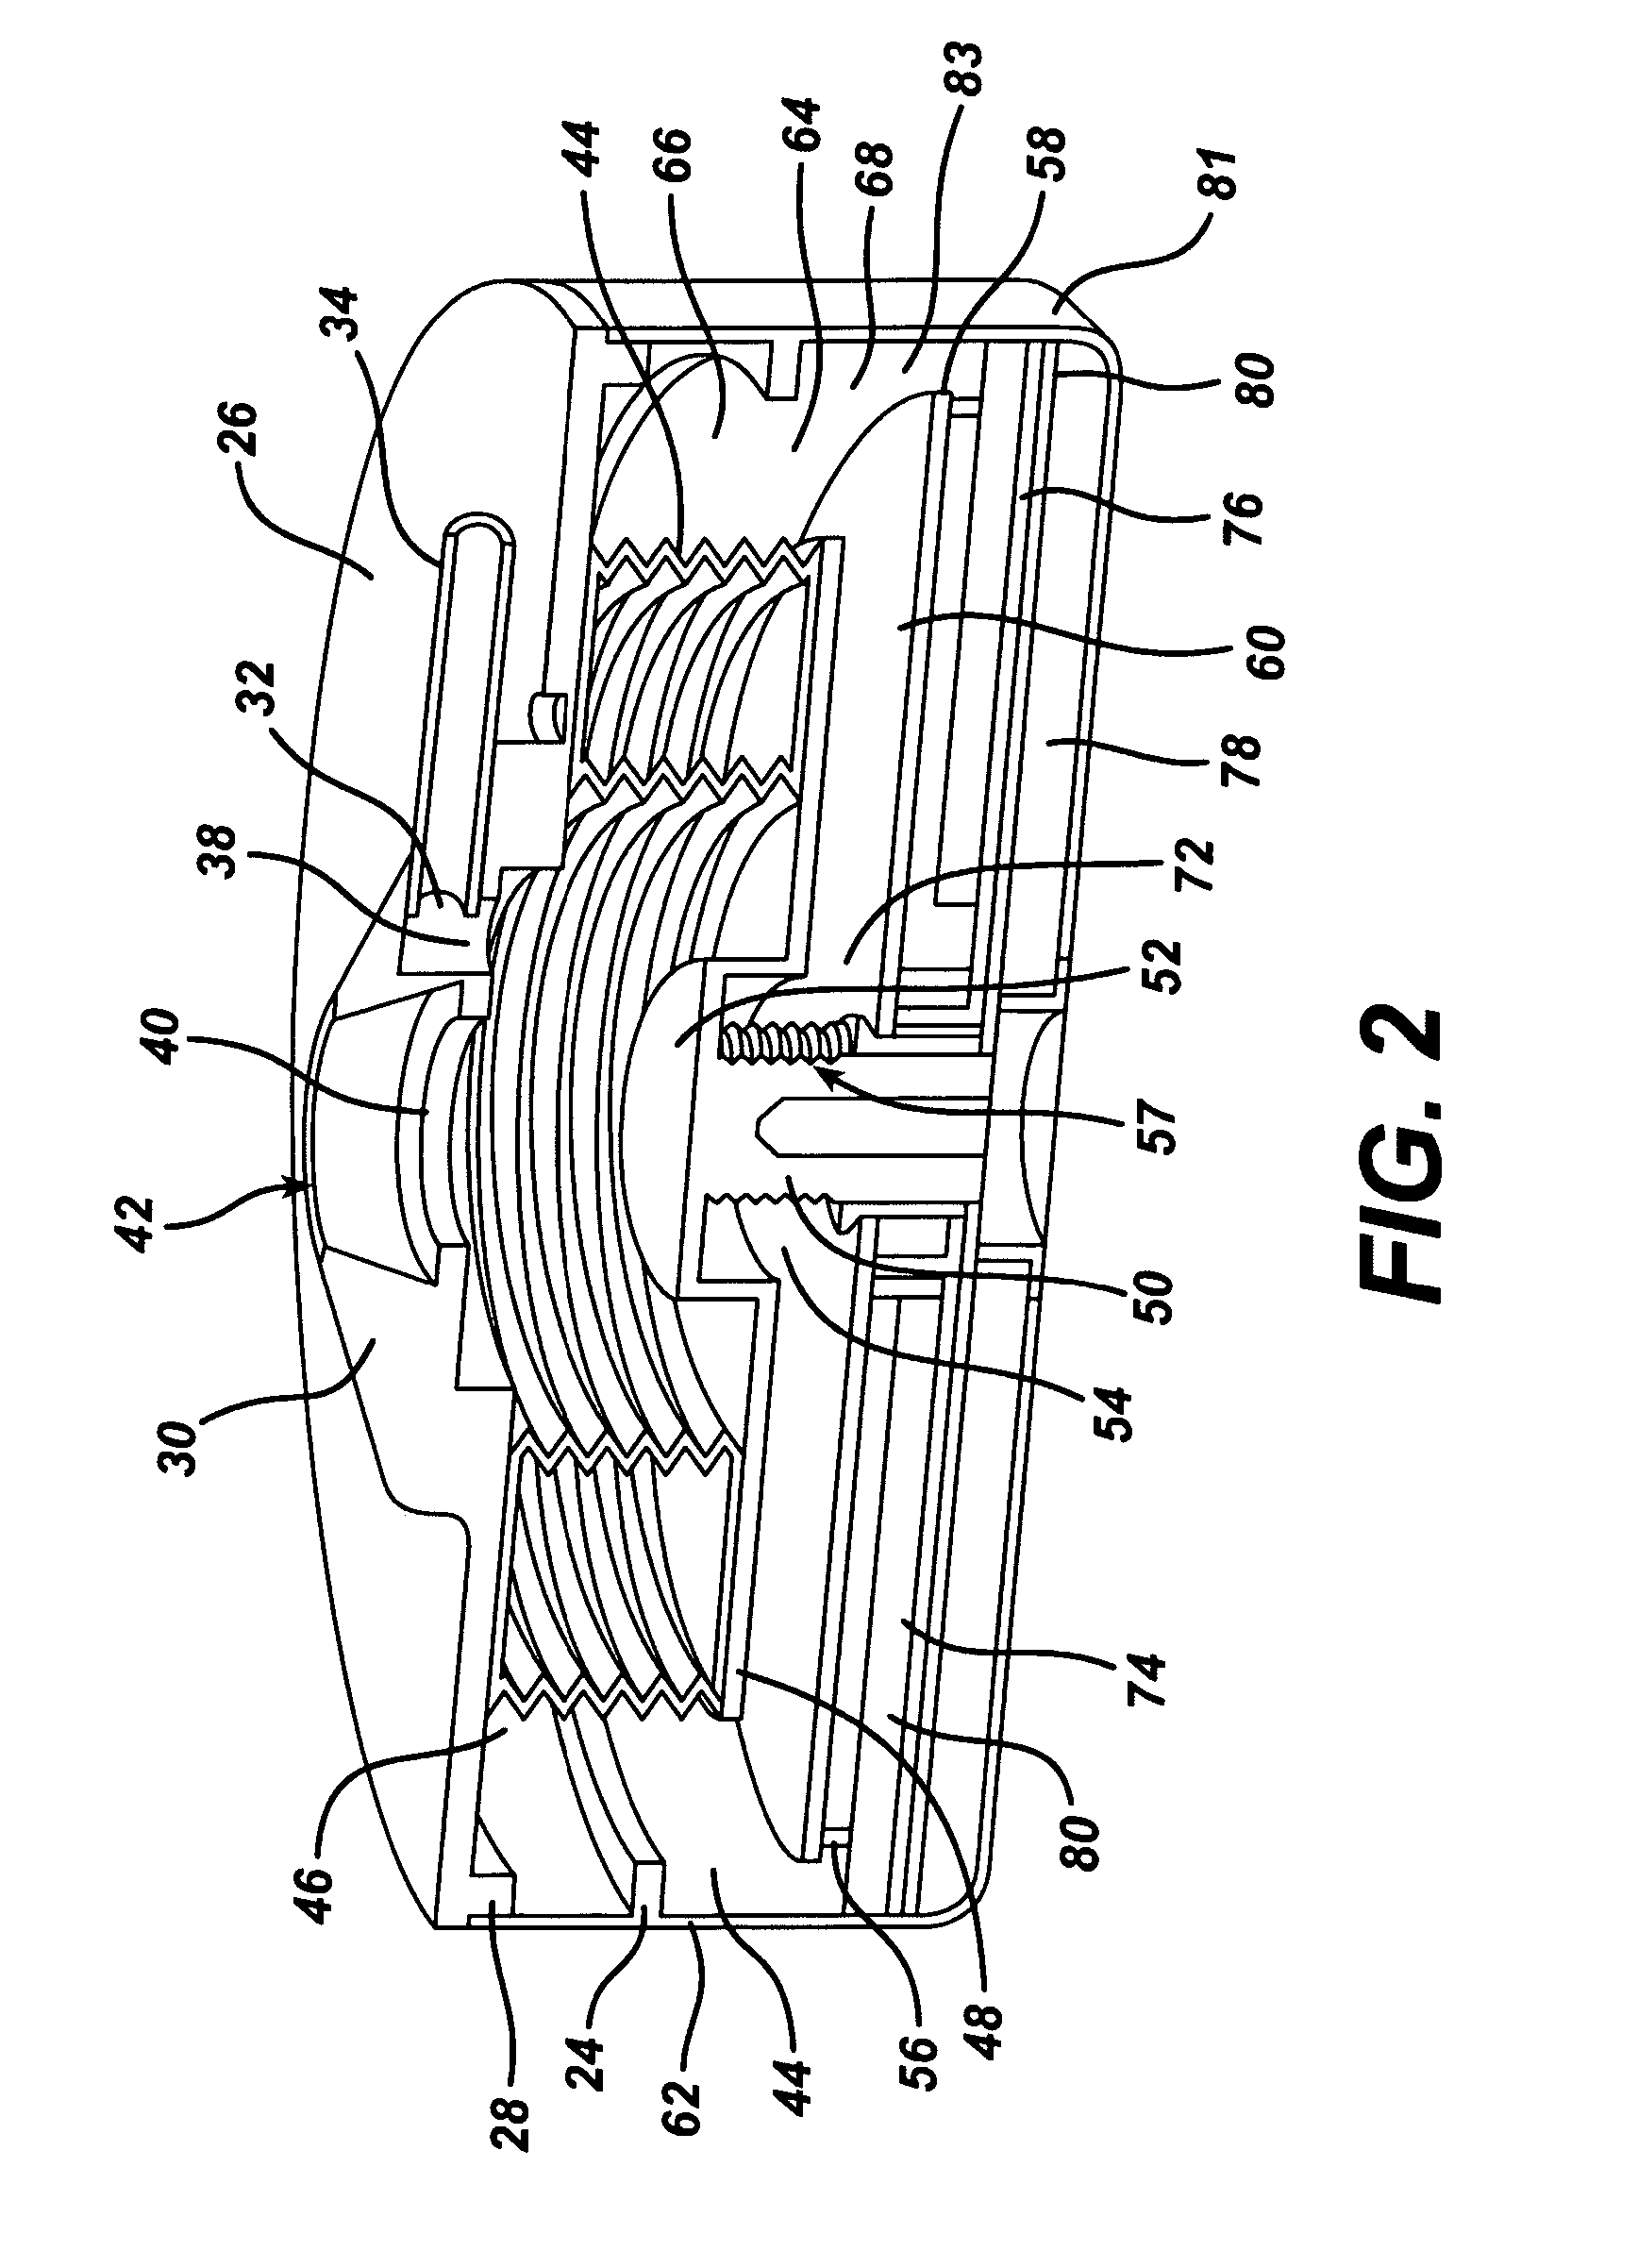 Piezo electrically driven bellows infuser for hydraulically controlling an adjustable gastric band